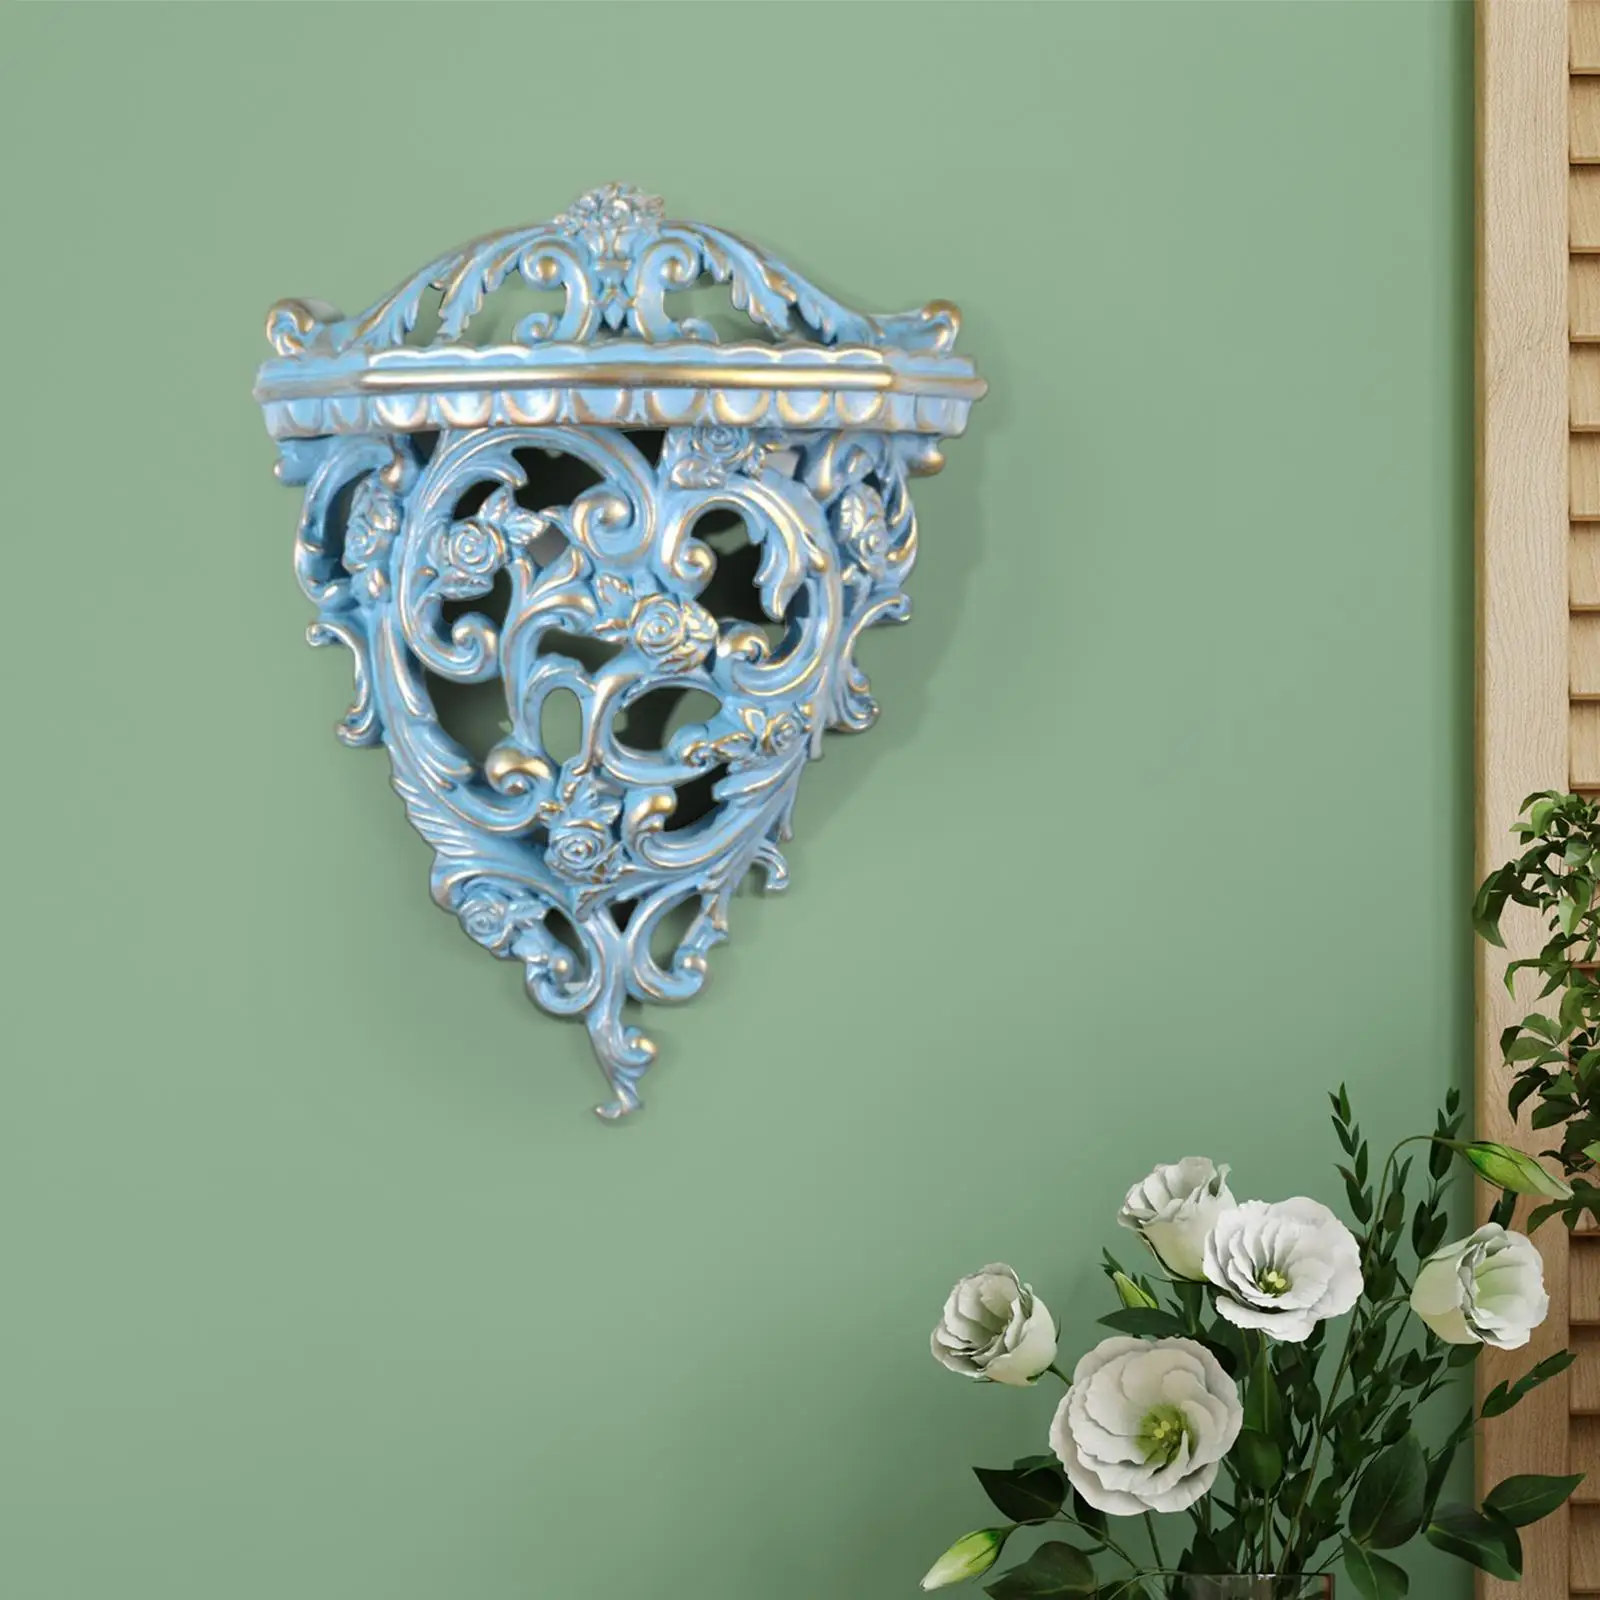 Retro Wall Floating Shelf Wall Organizer Decorative Hollow Flower Carving Wall Antique for Bedroom Living Room Home Office